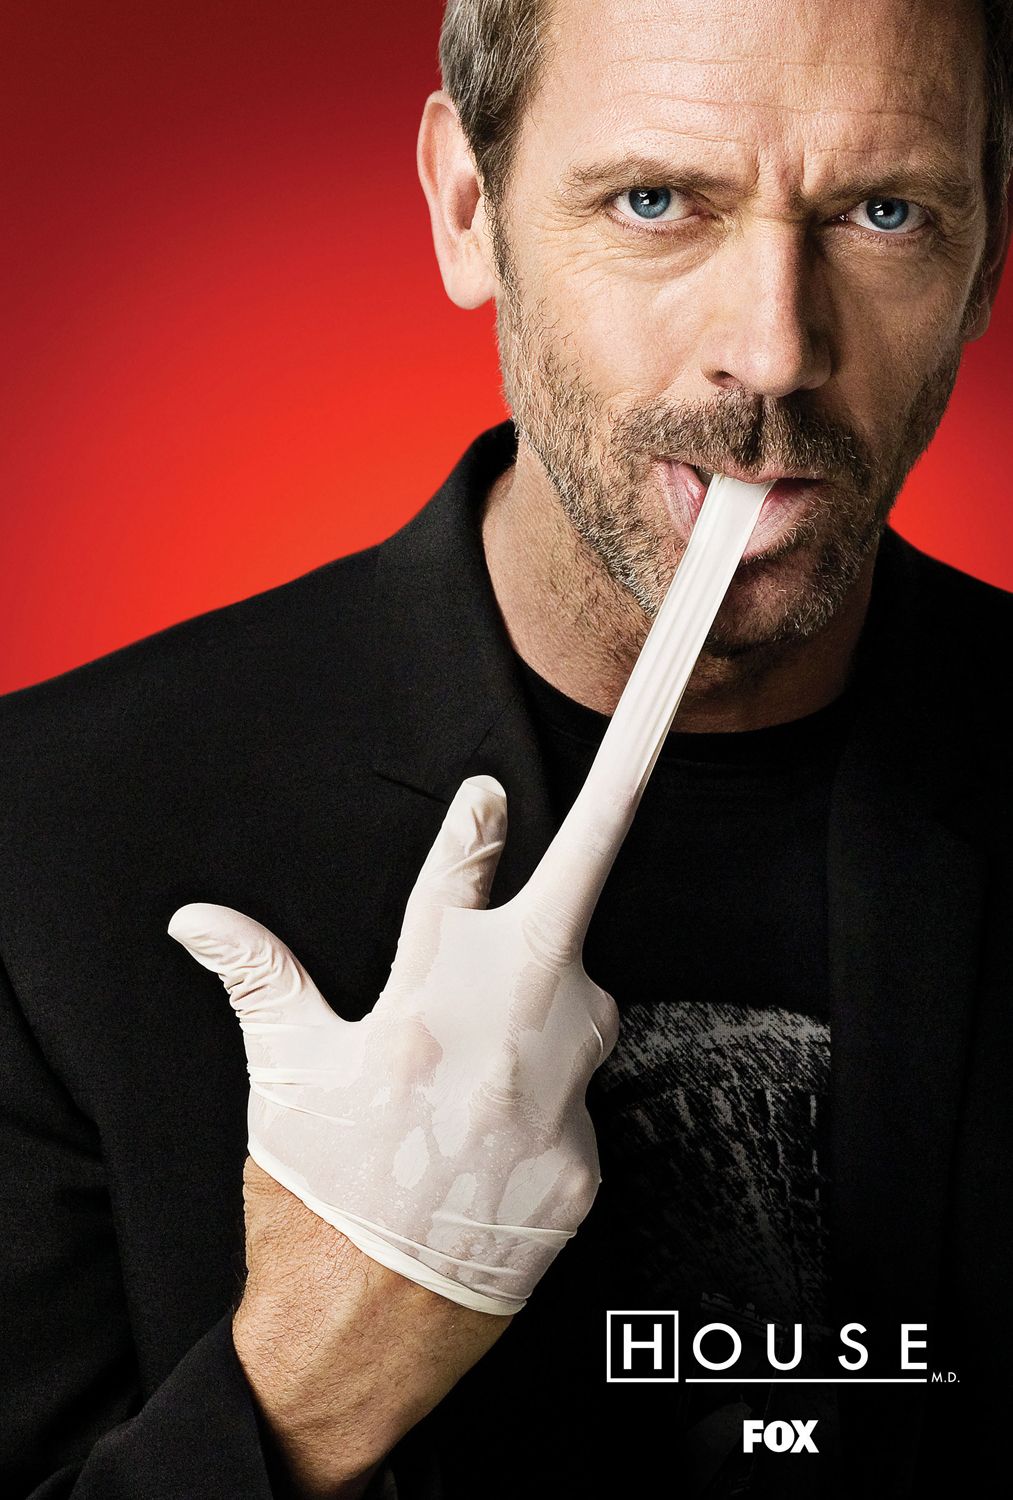 Extra Large TV Poster Image for House, M.D. (#4 of 20)